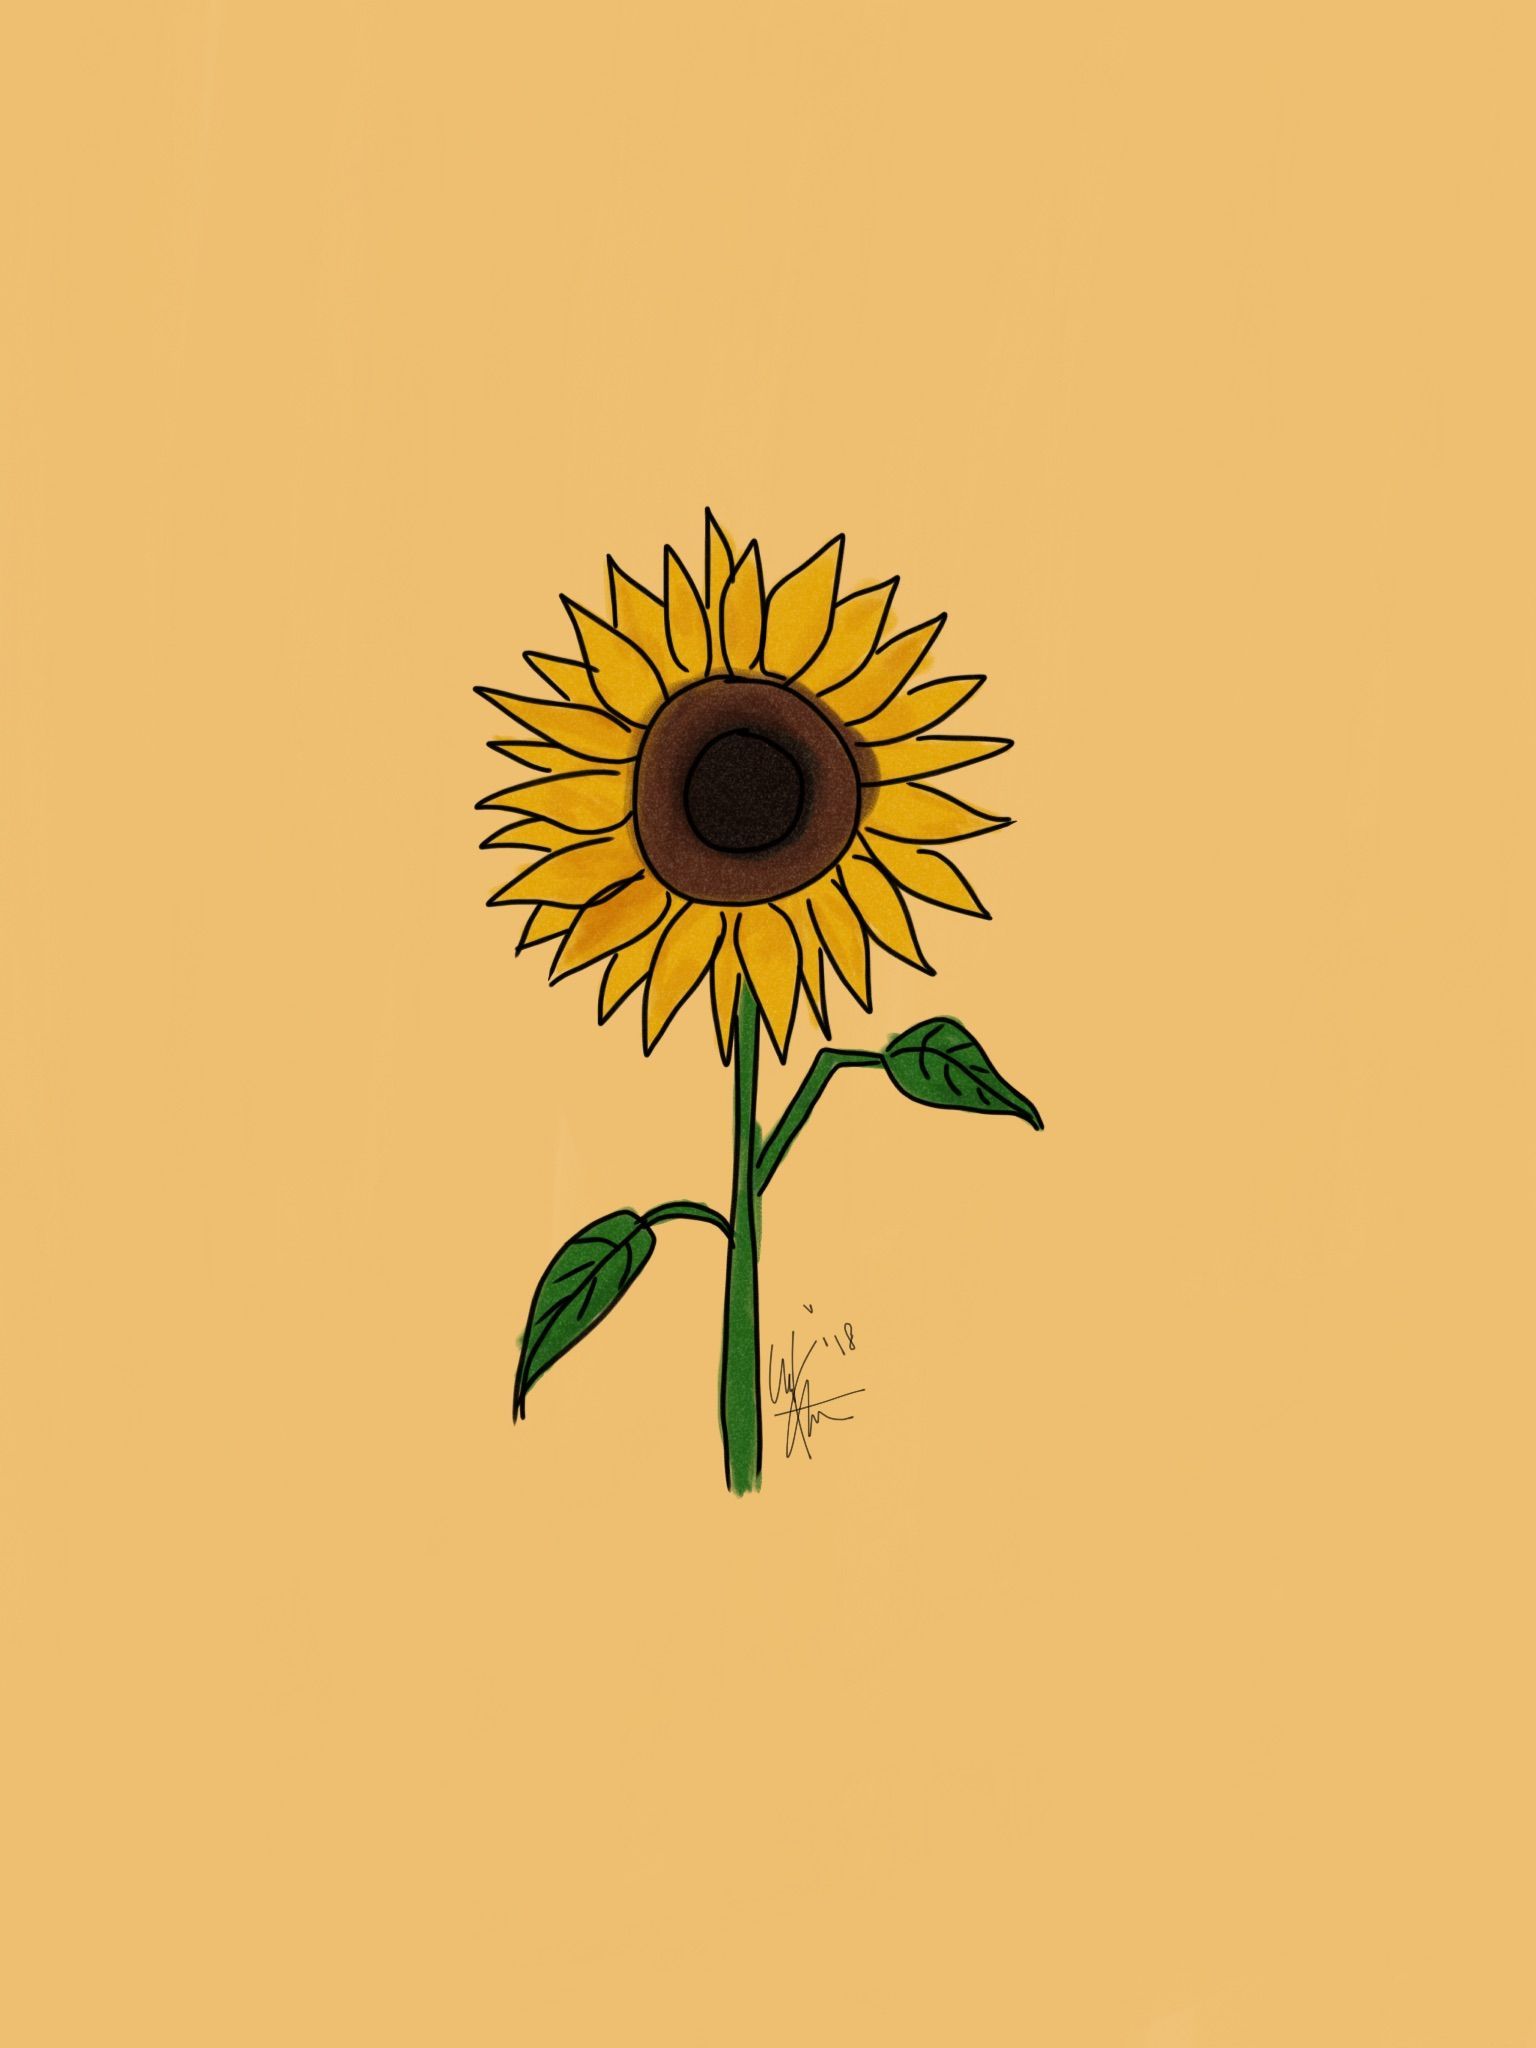 Cute Aesthetic Sunflower Wallpapers - Wallpaper Cave